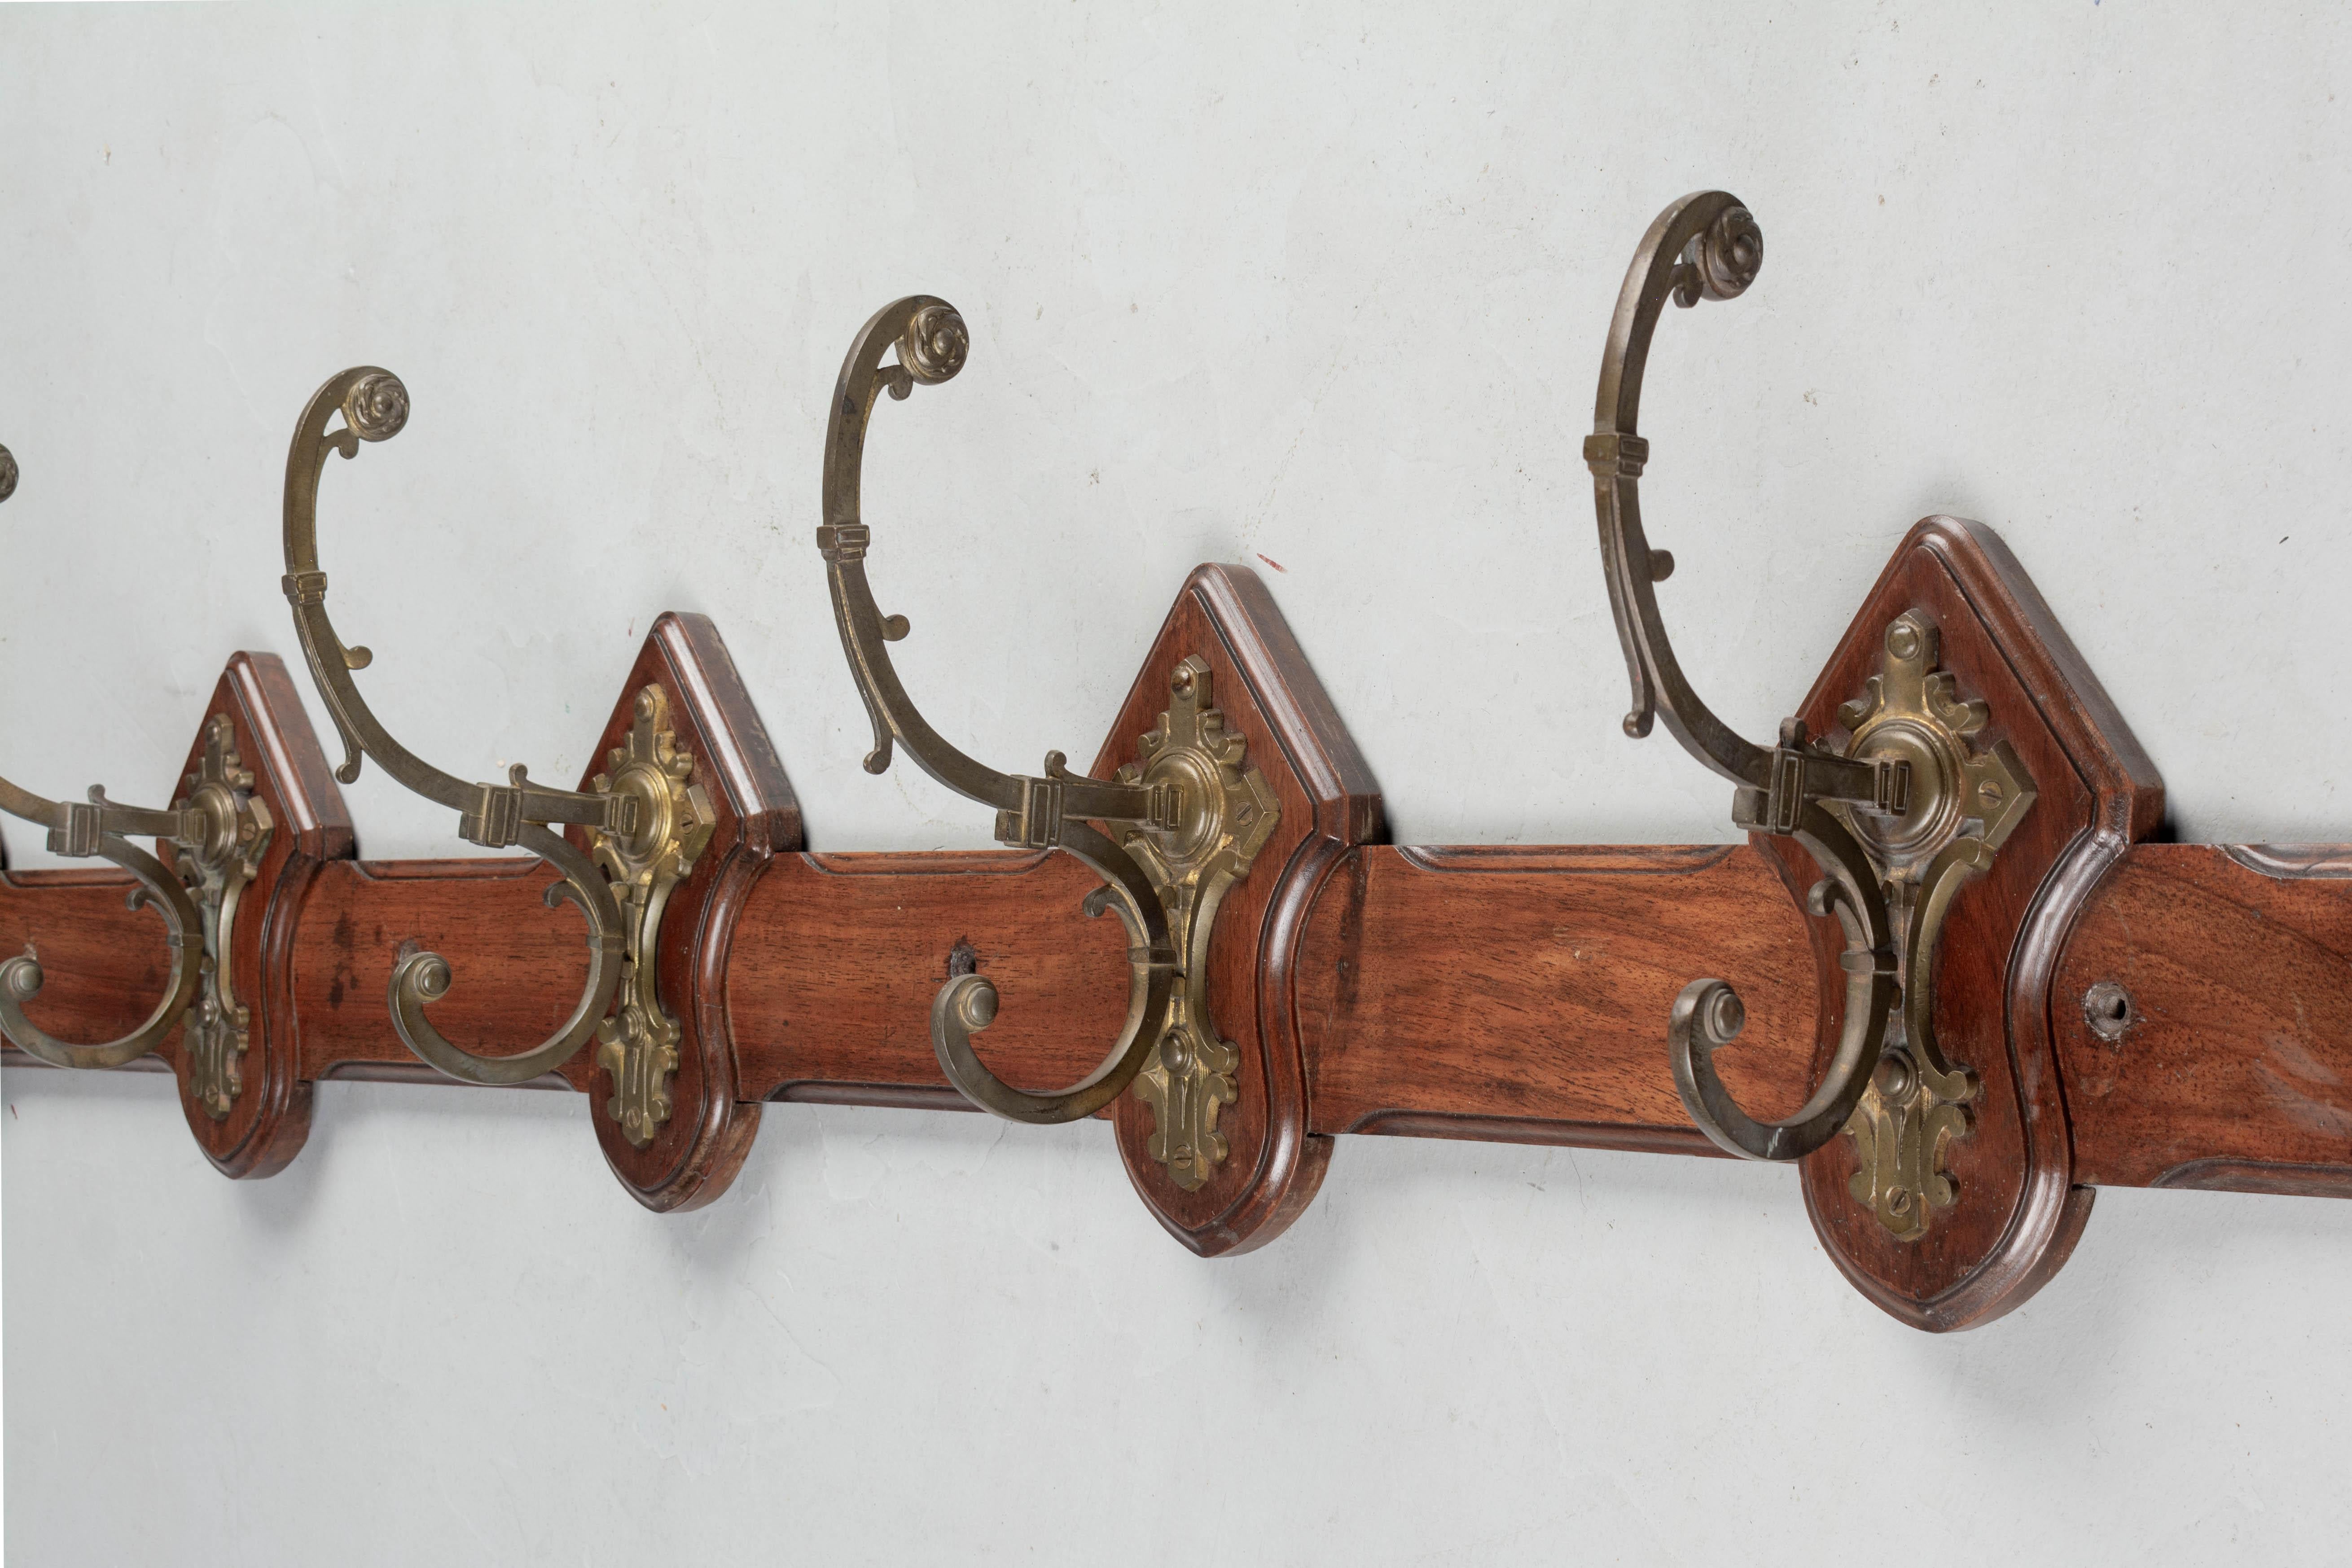 Brass French Mahogany Porte Manteau or Coat Rack For Sale